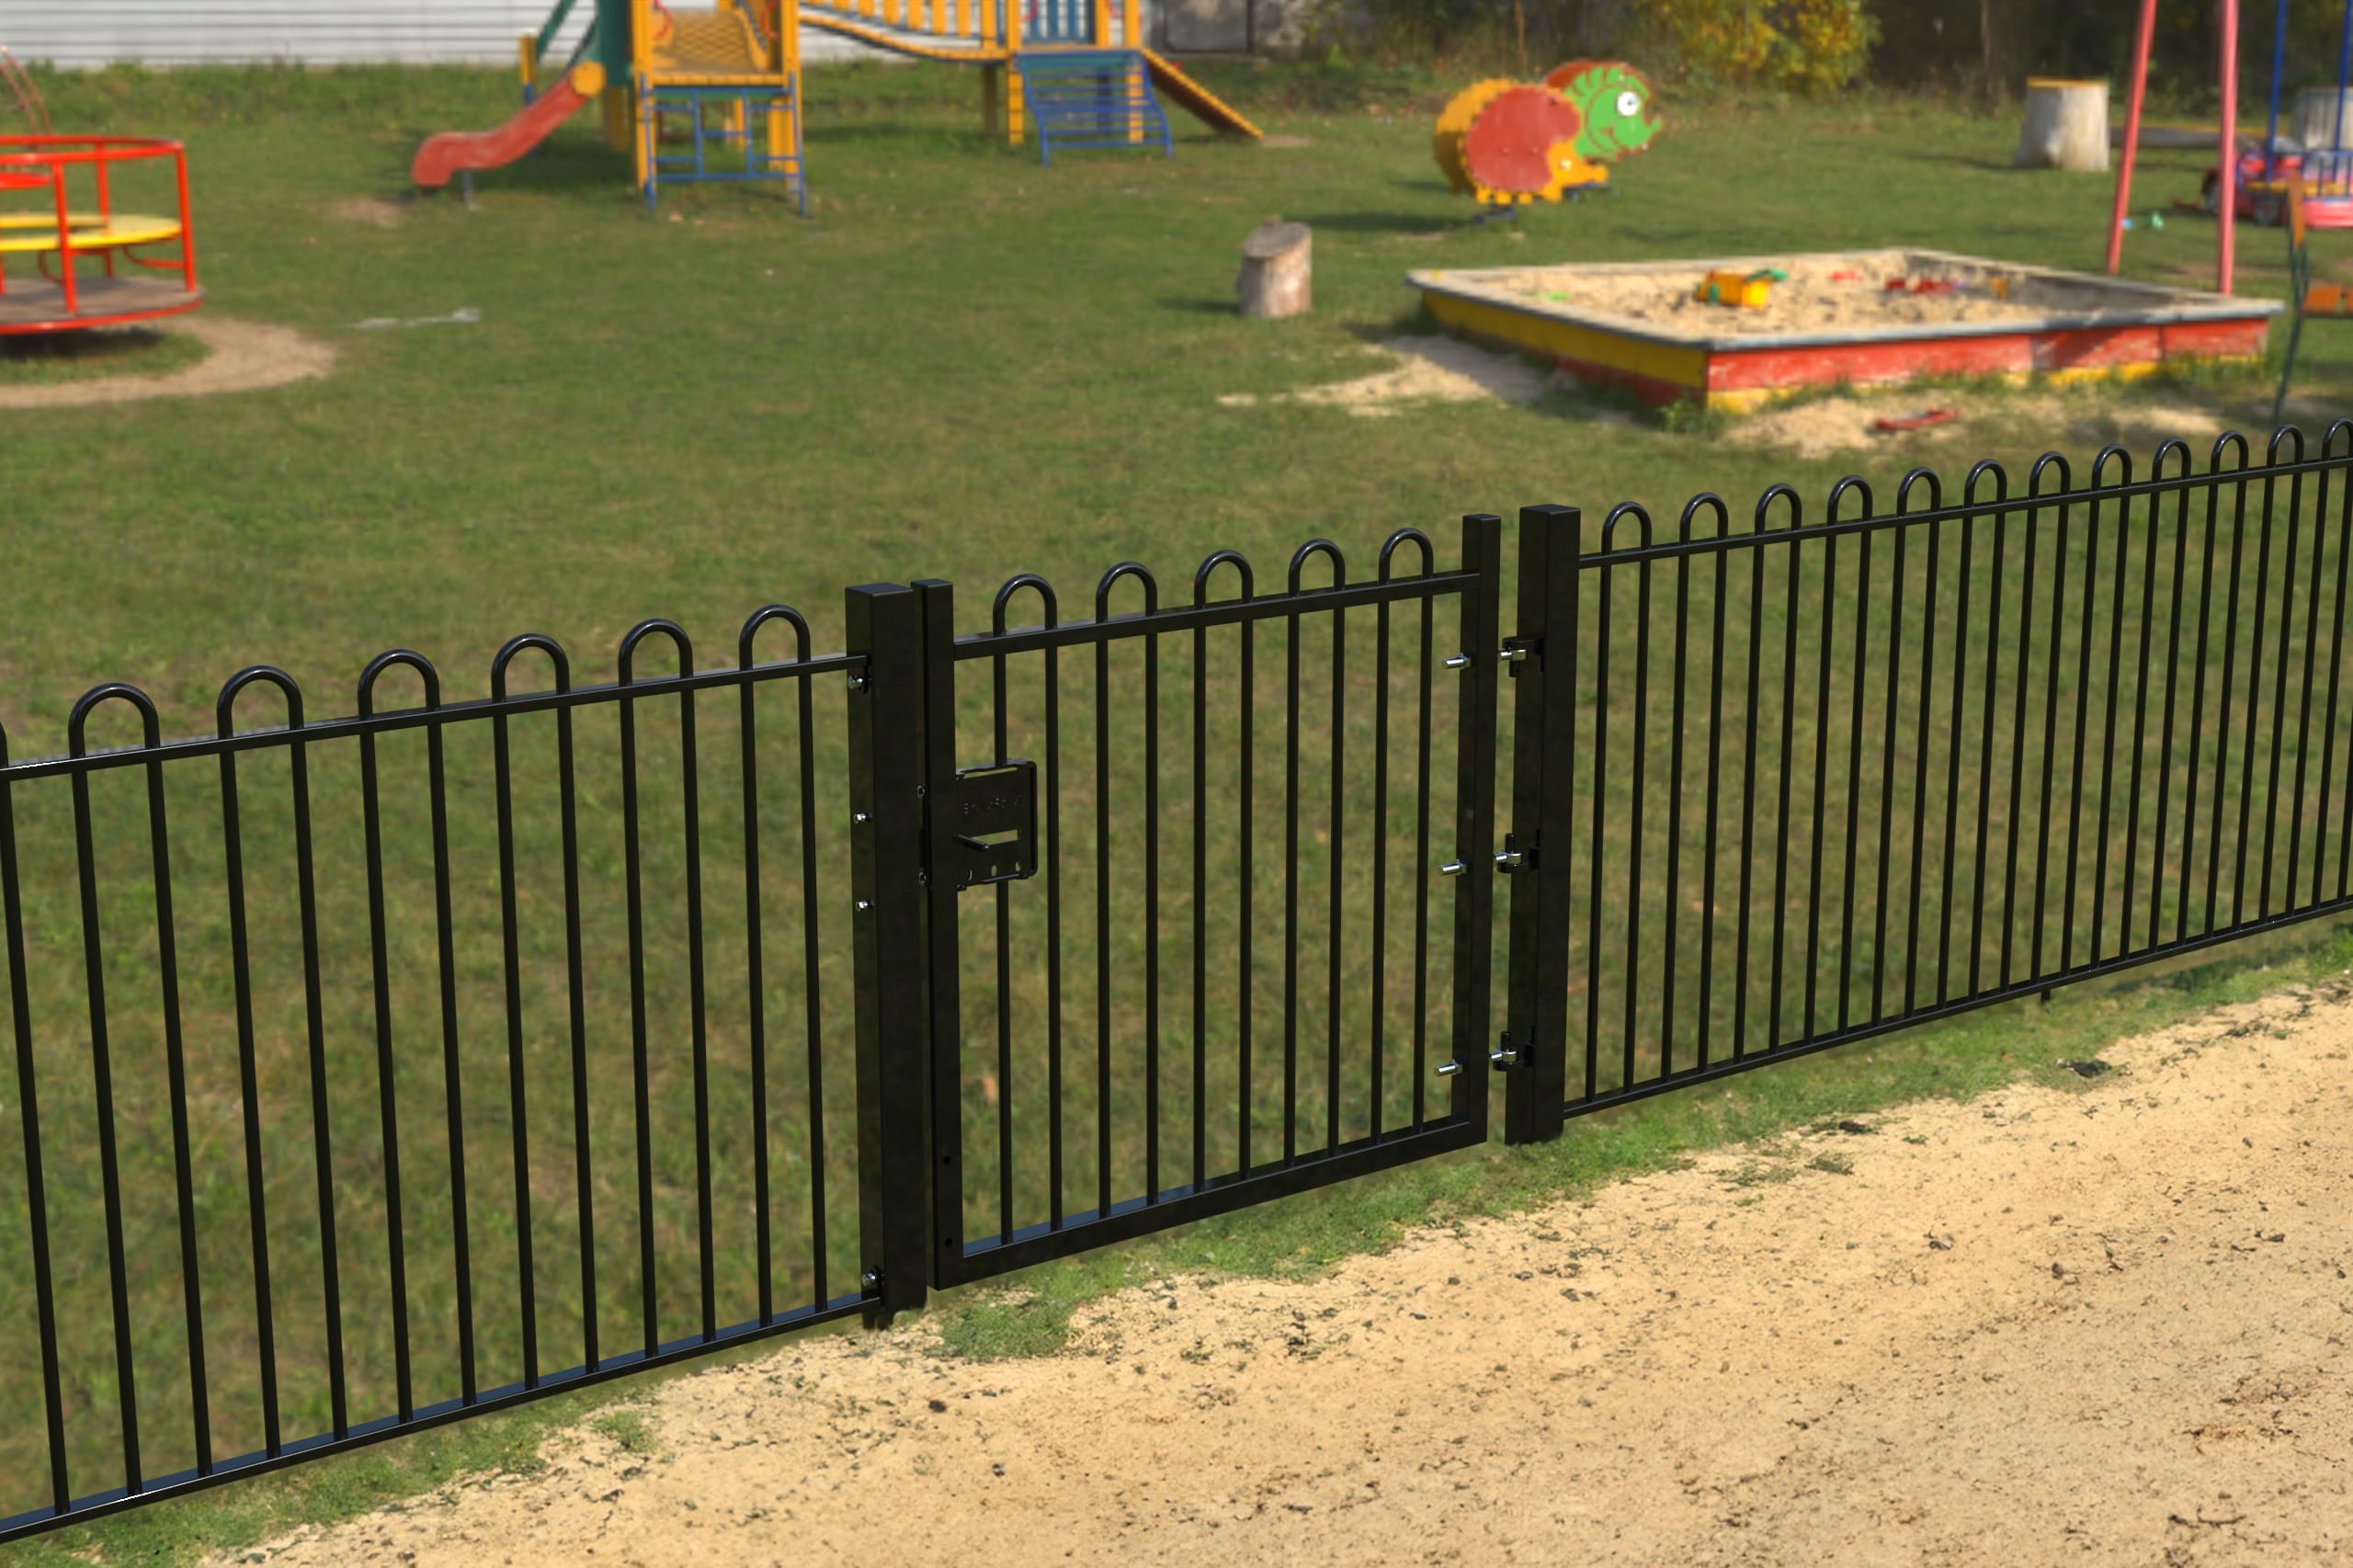 Fencing Solutions for Playgrounds, parks and schools